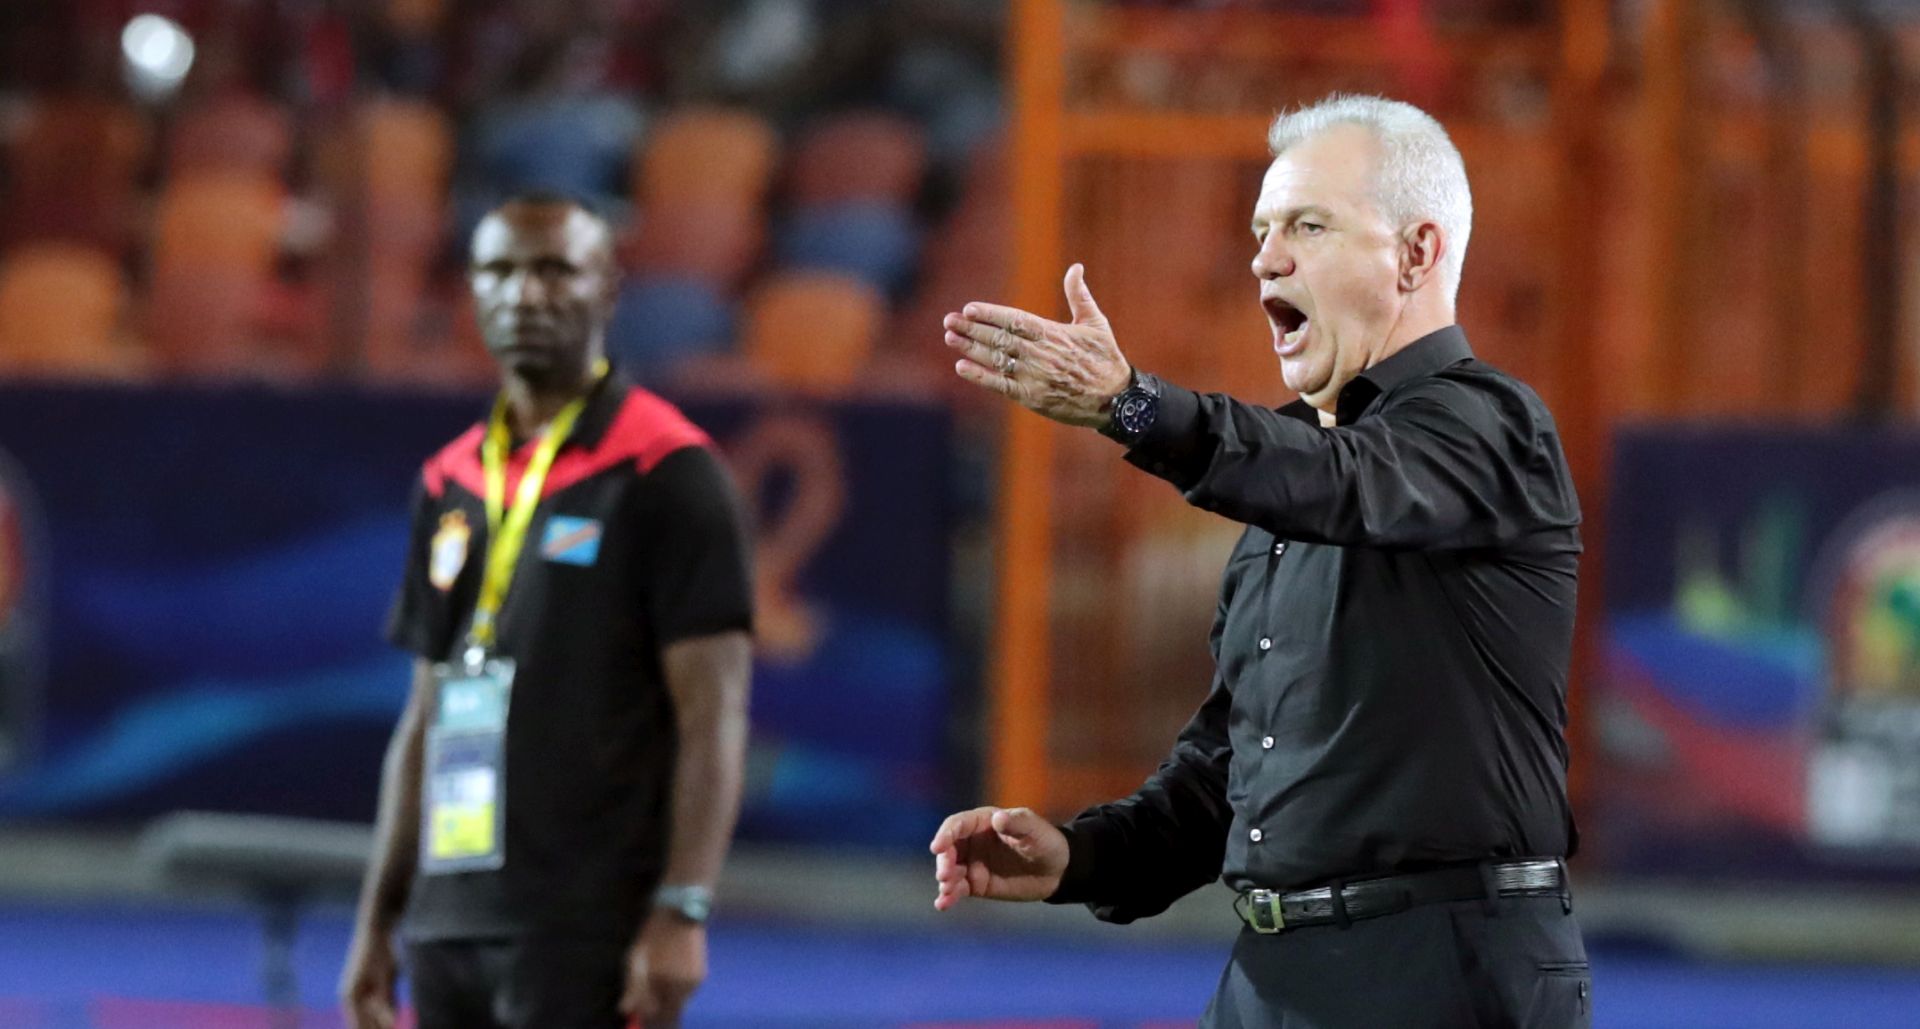 epa07675998 Egypt's coach Javier Aguirre reacts during the 2019 Africa Cup of Nations (AFCON) group A soccer match between Egypt and DR Congo in Cairo, Egypt, 26 June 2019. The 2019 Africa Cup of Nations (AFCON) will take place from 21 June until 19 July 2019 in Egypt.  EPA/KHALED ELFIQI